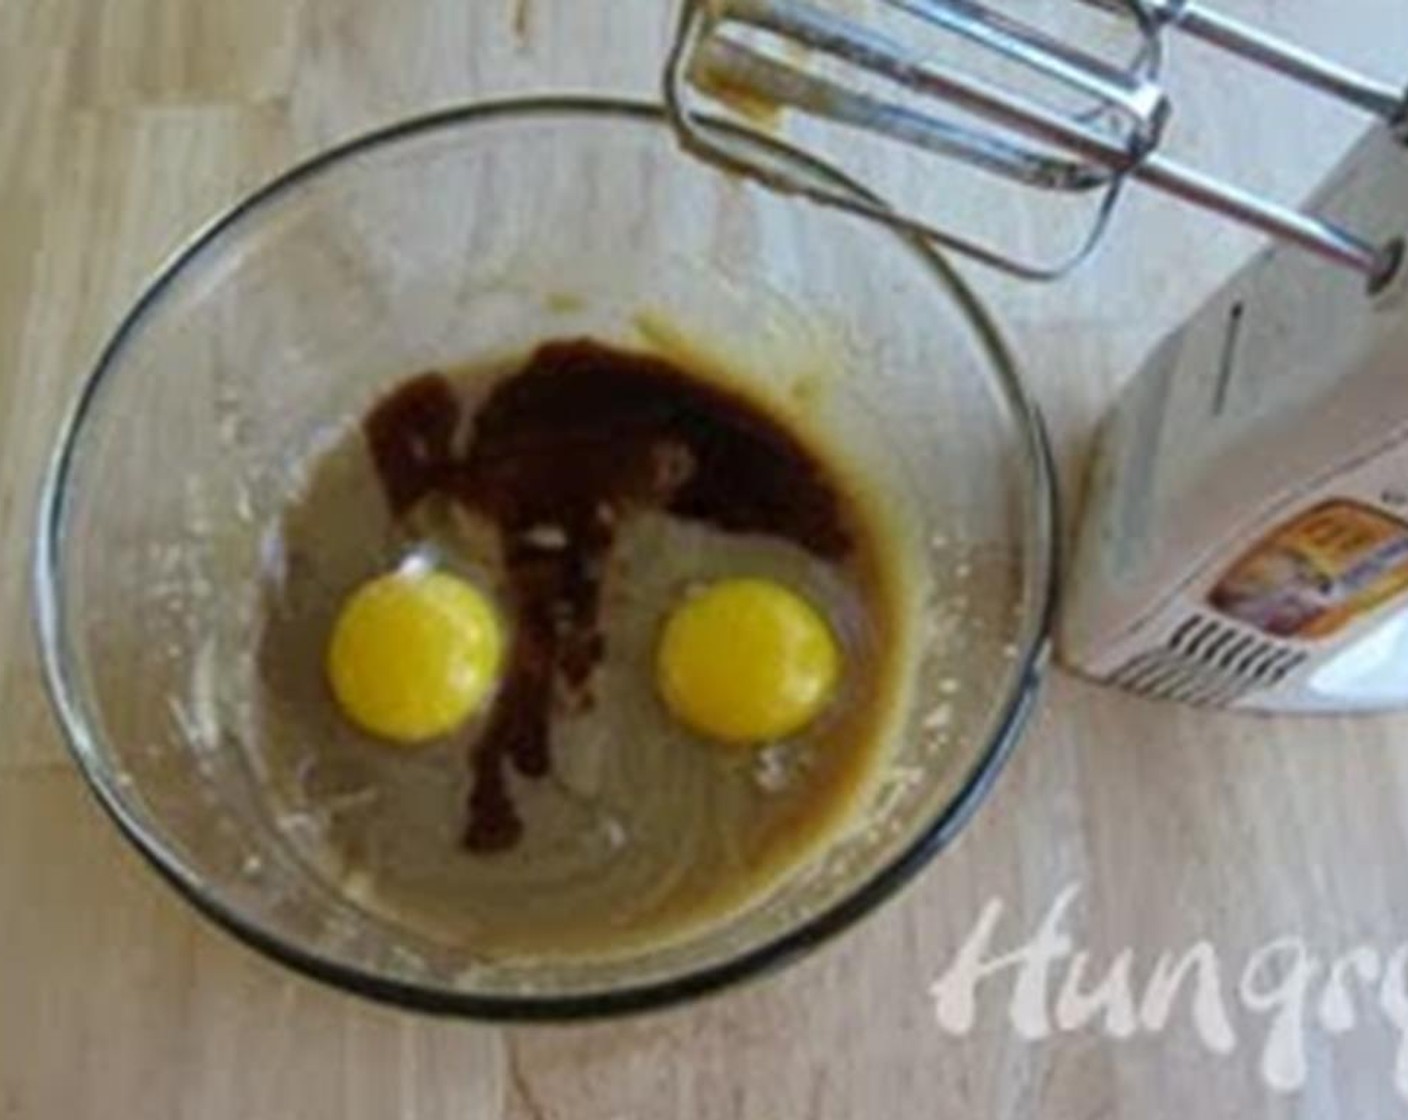 step 3 Add the Farmhouse Eggs® Large Brown Egg (1), Egg Yolk, and Vanilla Extract (1/2 Tbsp) and beat until fully incorporated.